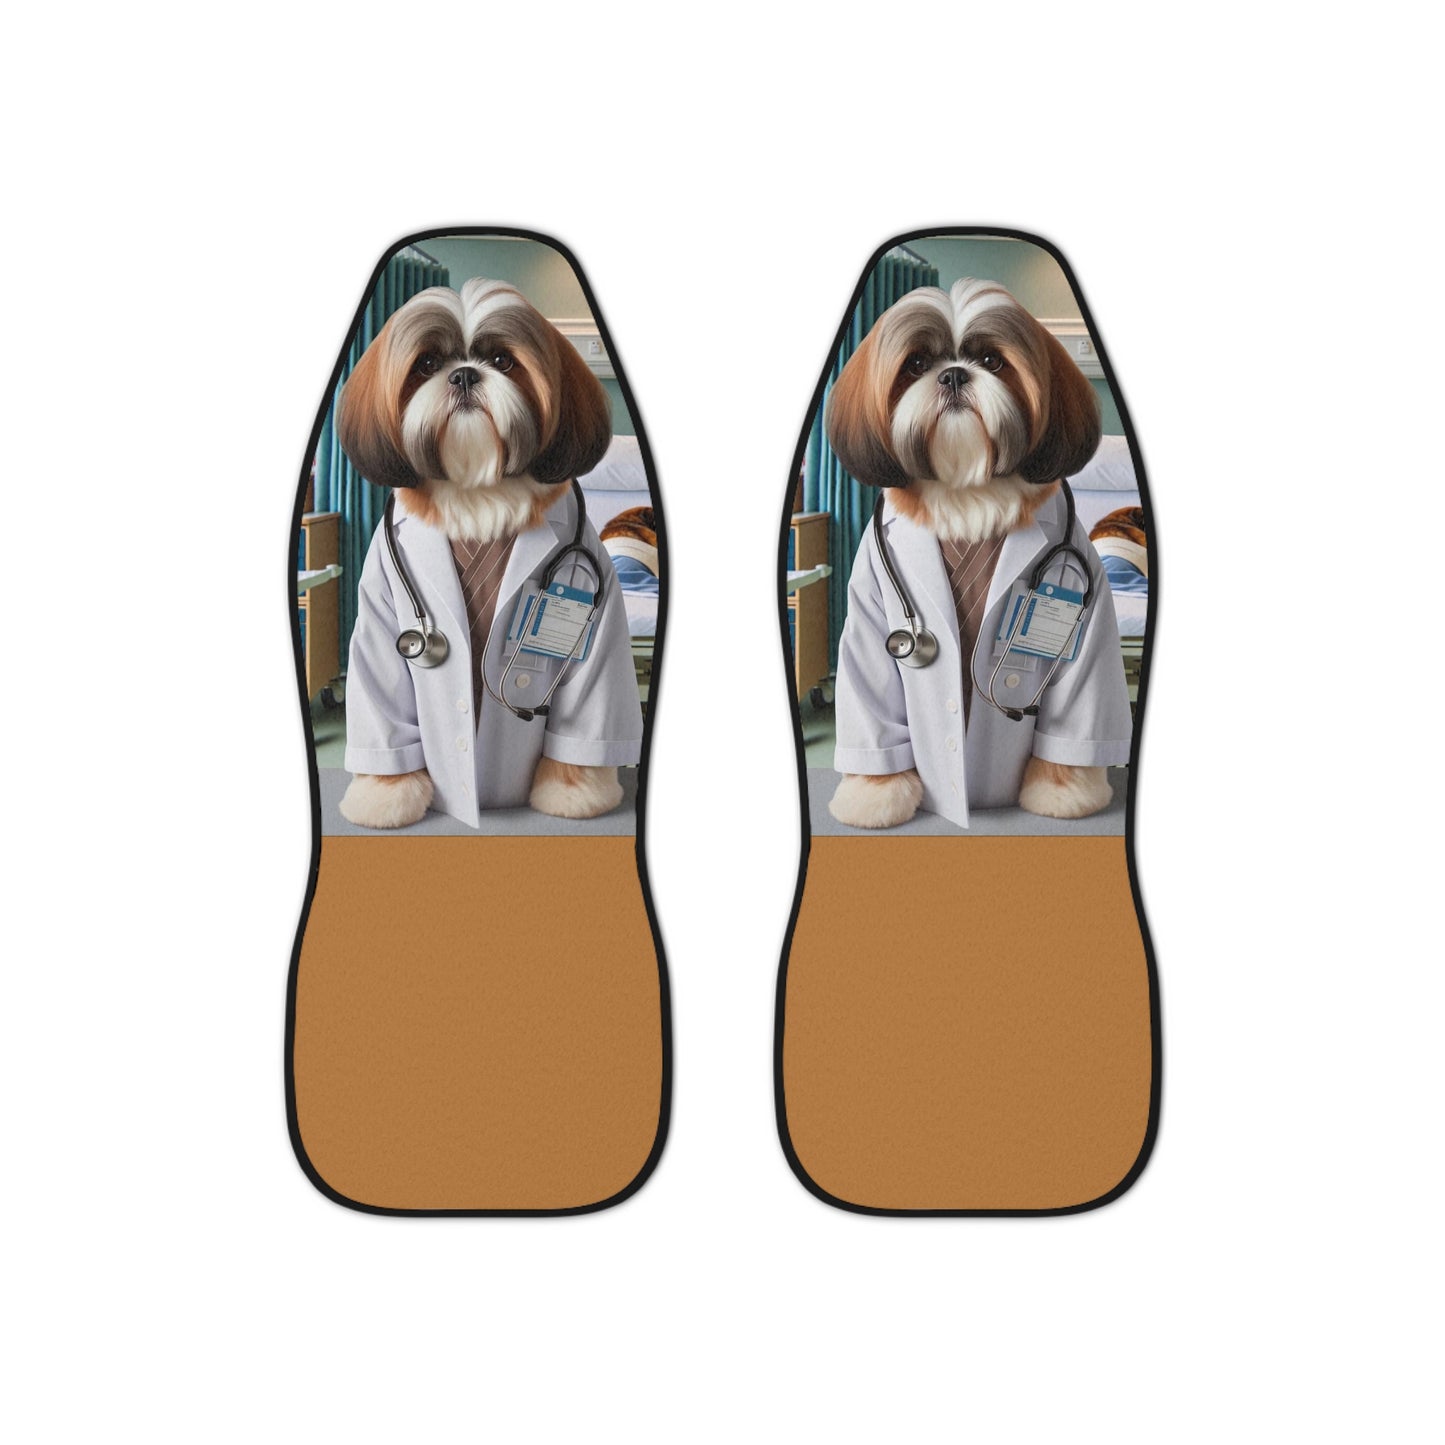 Cute Shih Tzu Dog Lover Doctor Car Seat Covers - Snug Fit Polyester Vehicle Protection Set- Gift perfect for nurses doctors Shih Tzu parents